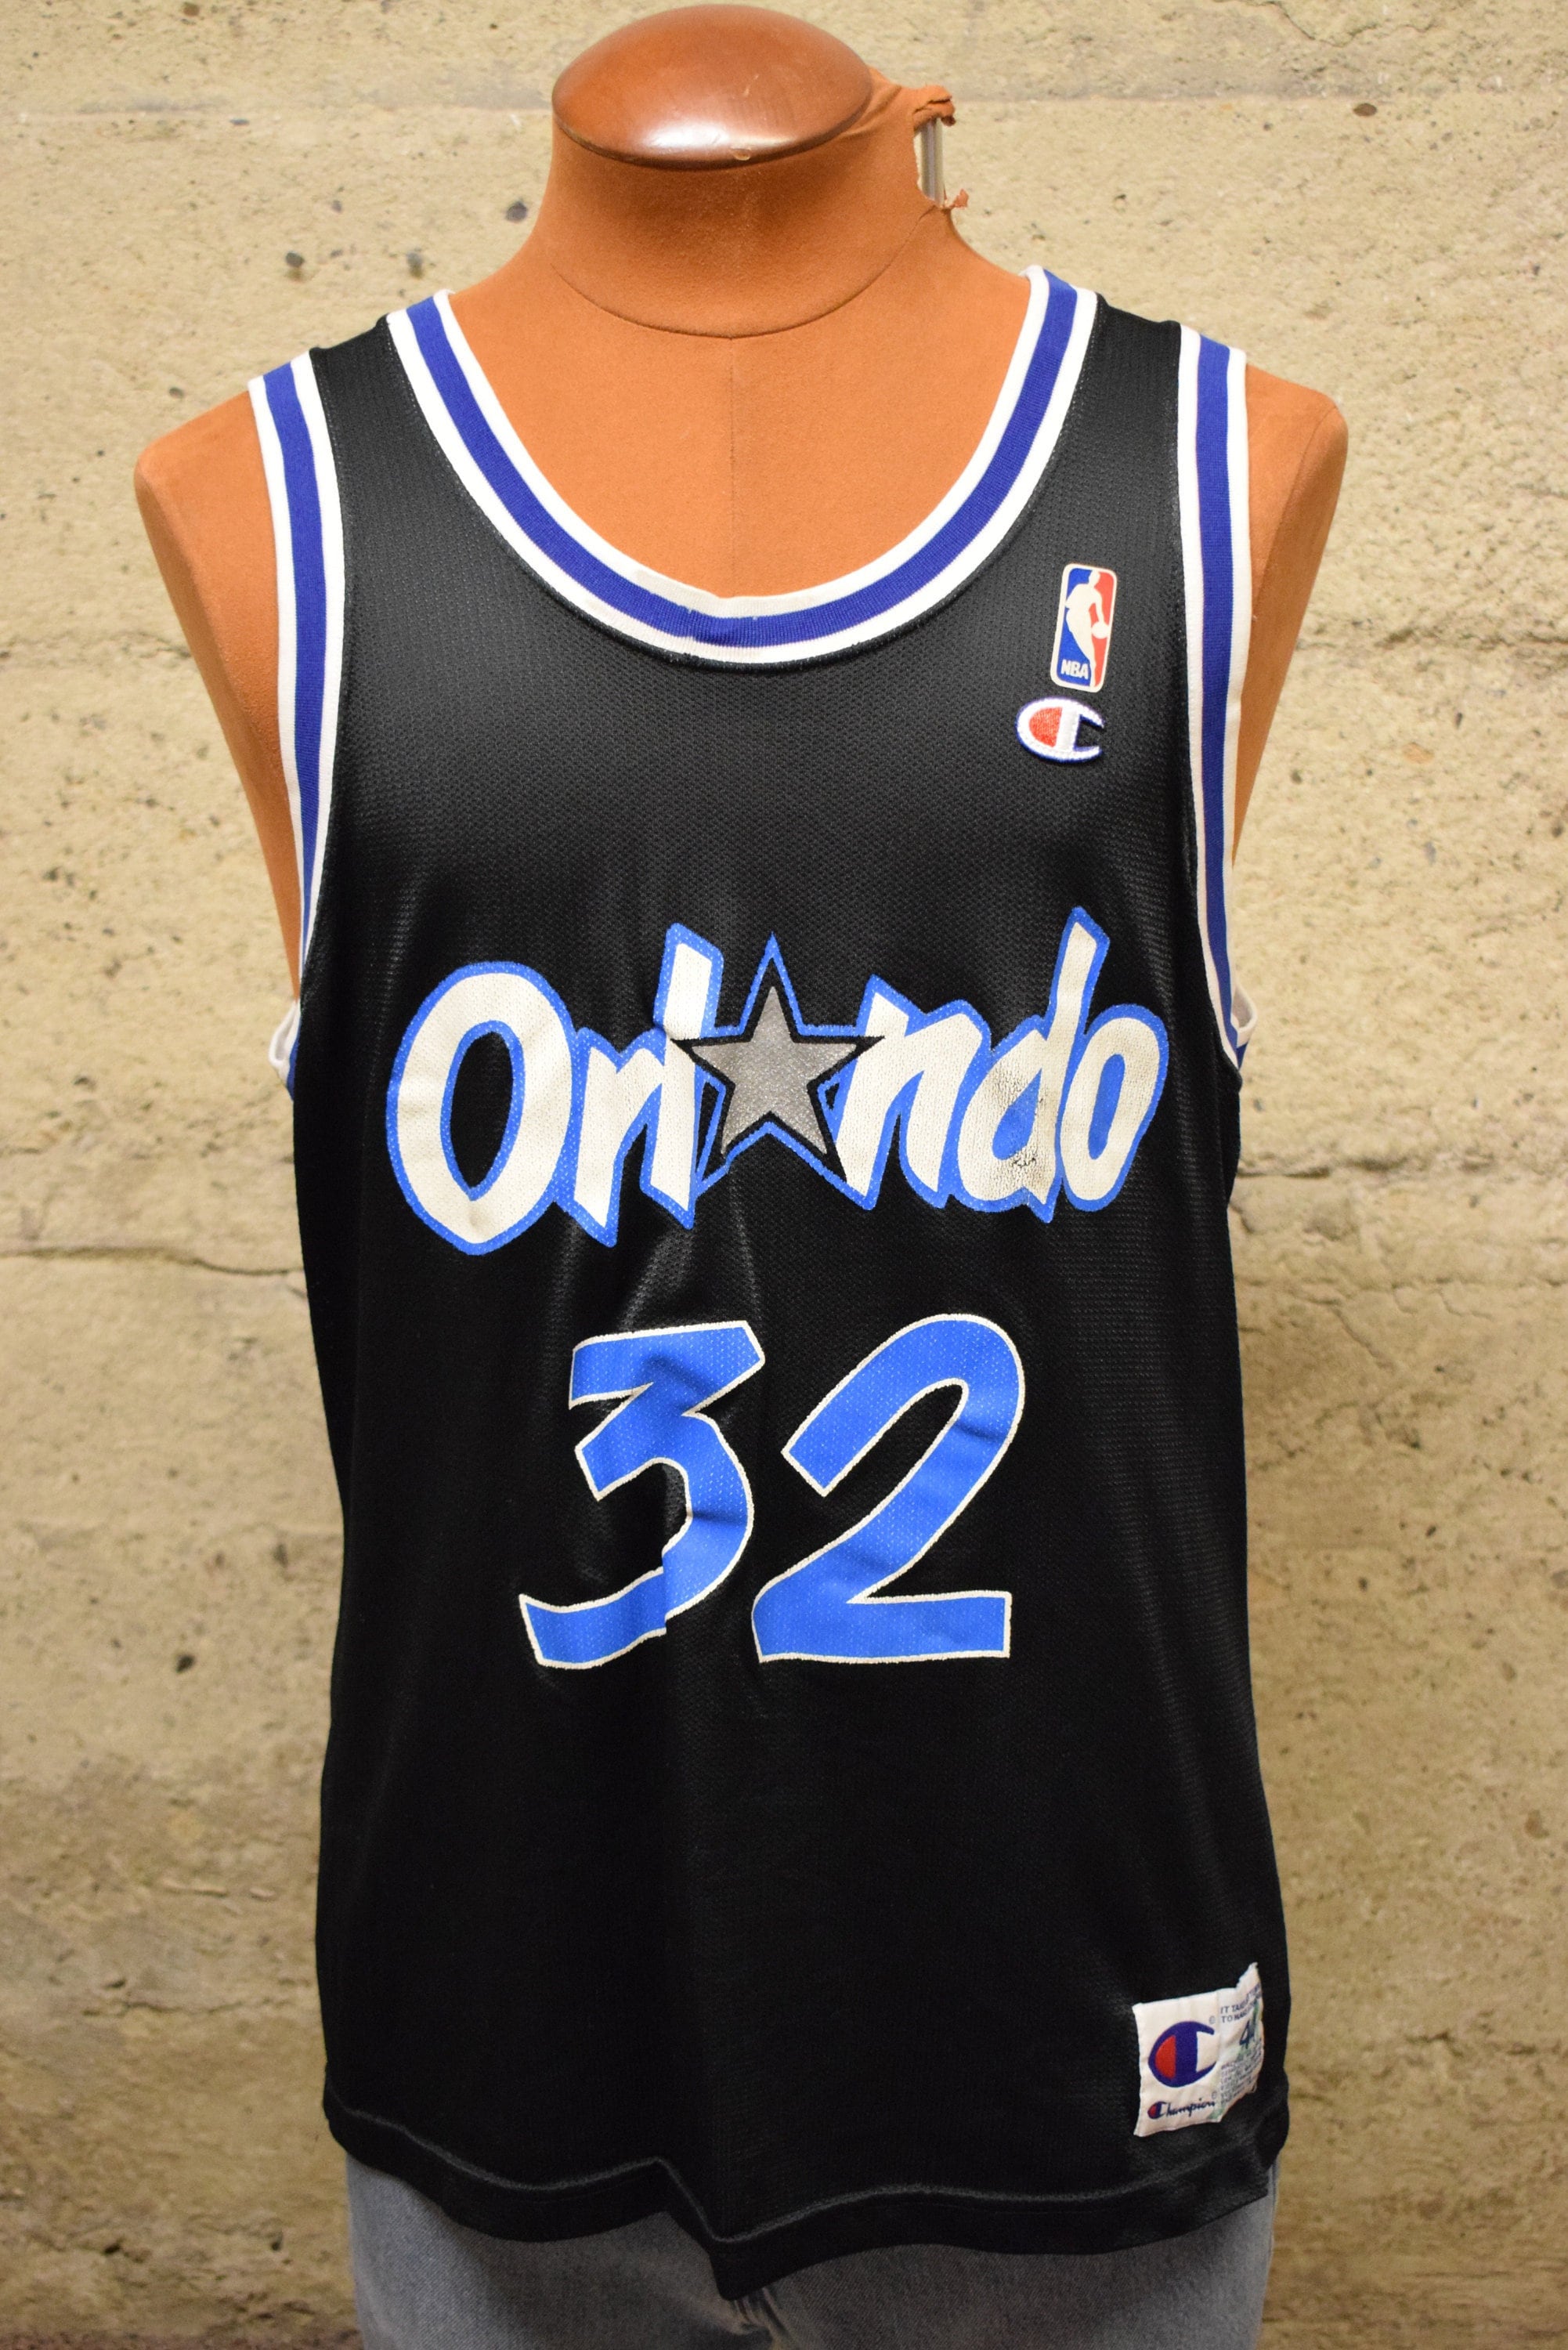 Shaquille O'neal Jersey 90s Vintage Orlando Magic 32 